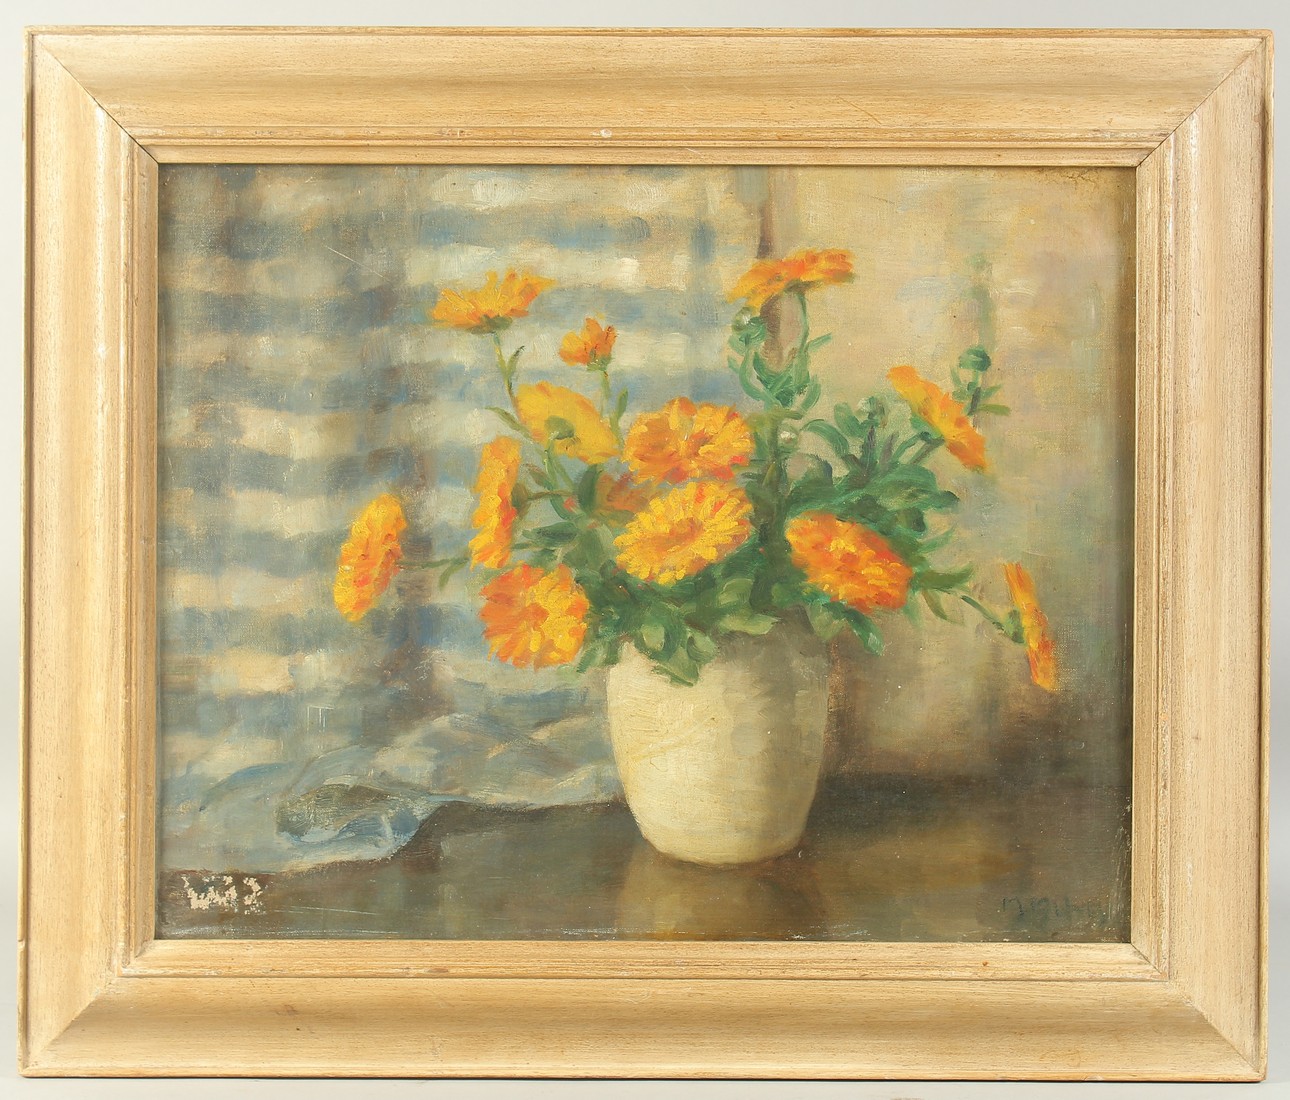 Matilda Mulvey (20th Century) A still life of Marigolds in a cream vase, oil on canvas, signed,